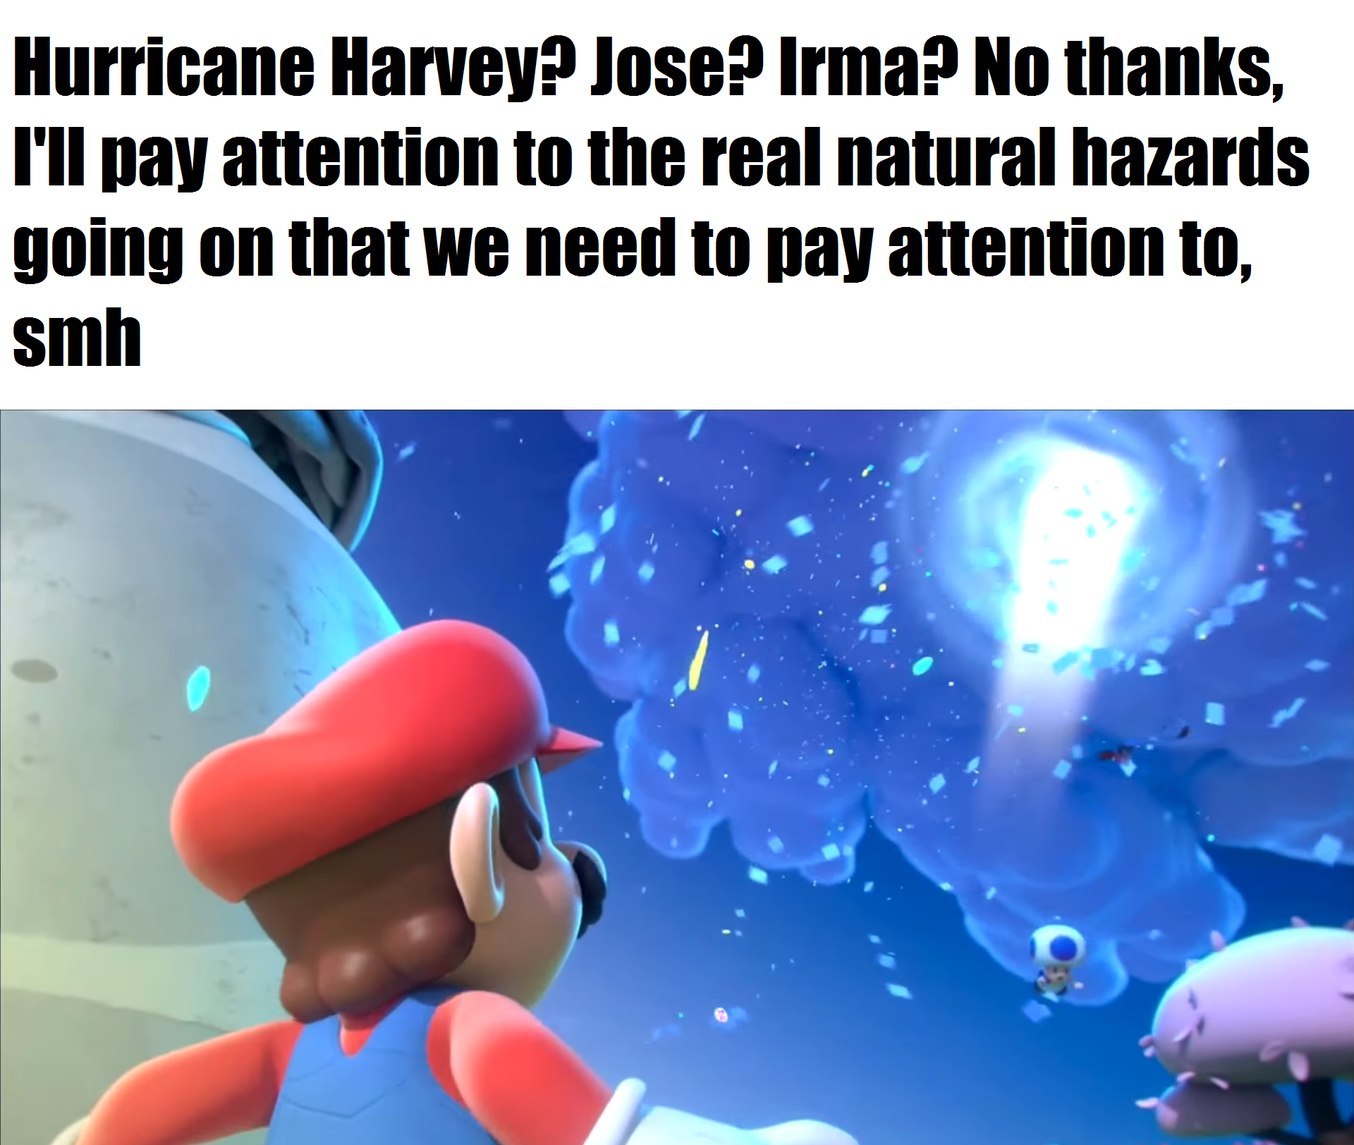 If you don't get the reference, it's from Mario+Rabbids: Kingdom Battle - meme